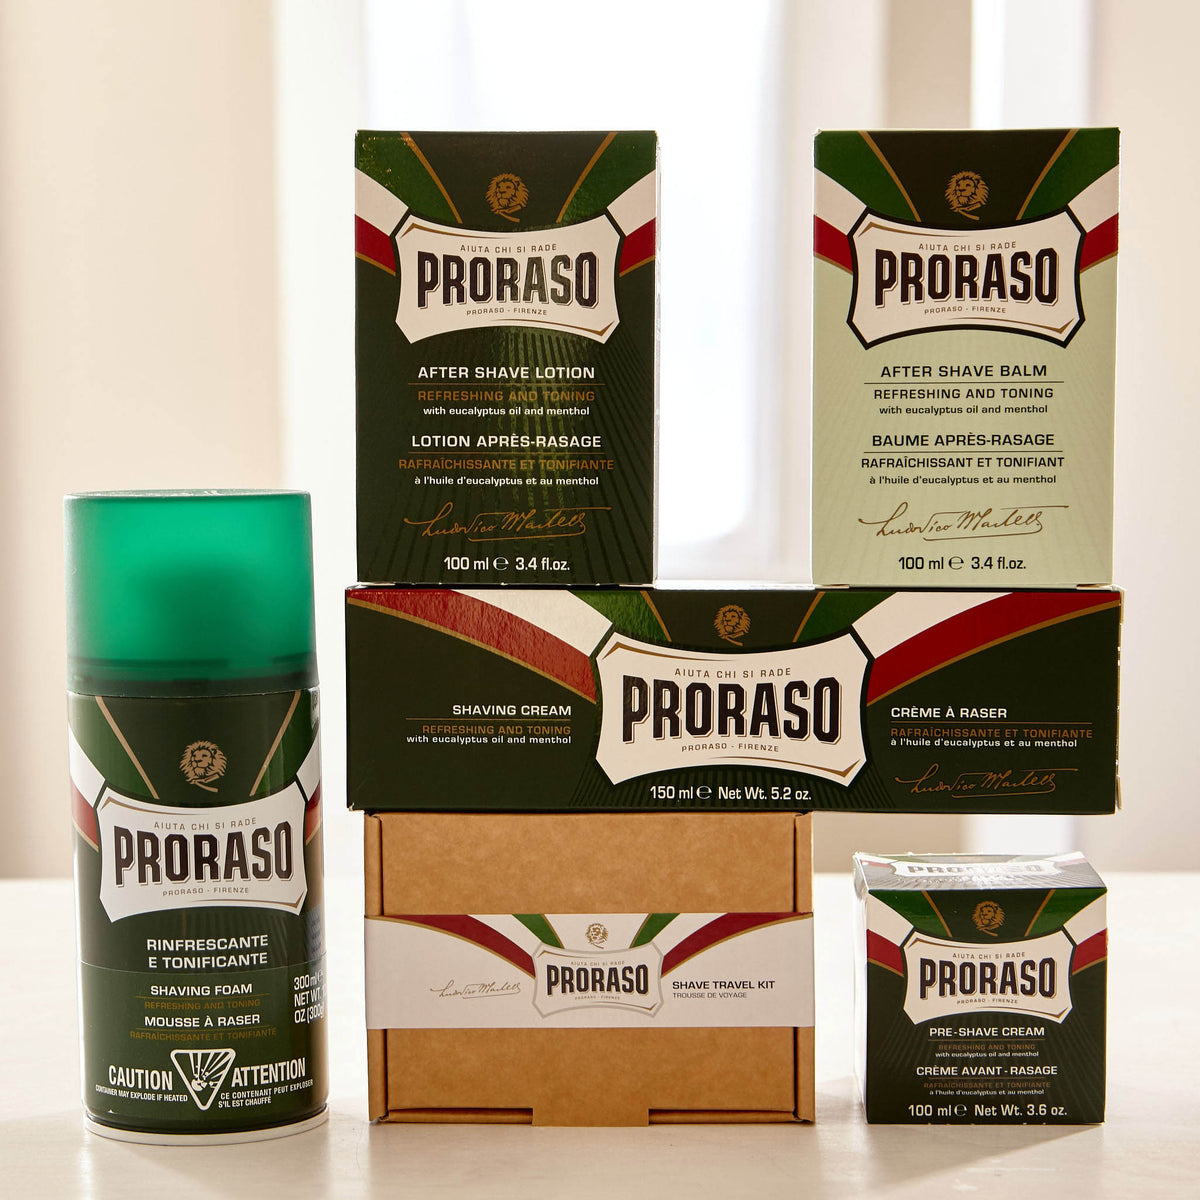 PRORASO AFTER-SHAVE BALM